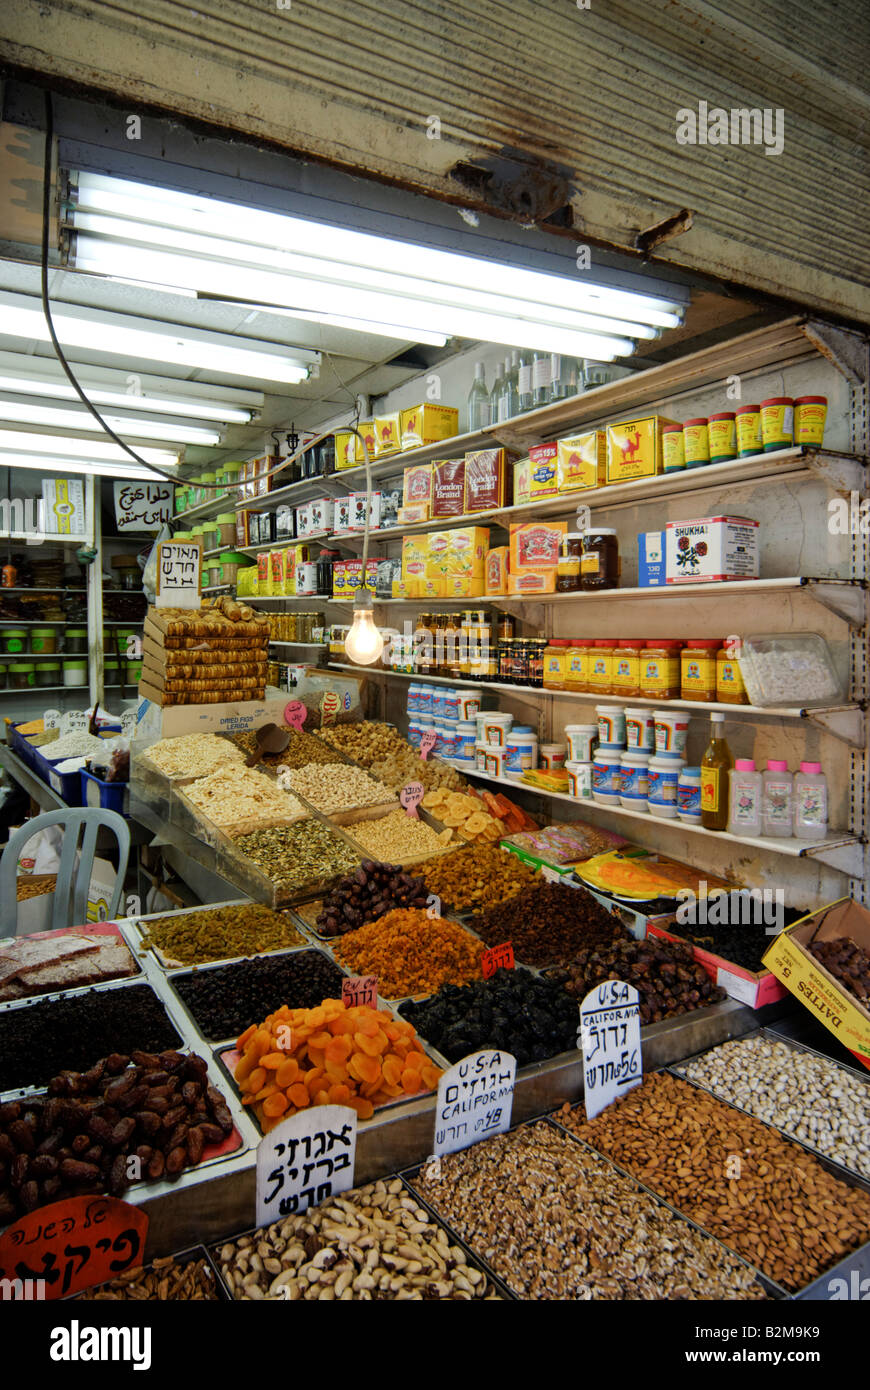 Israel Tel Aviv Neve Tzedek interior of a grocery shop selling dry fruit and nuts Stock Photo